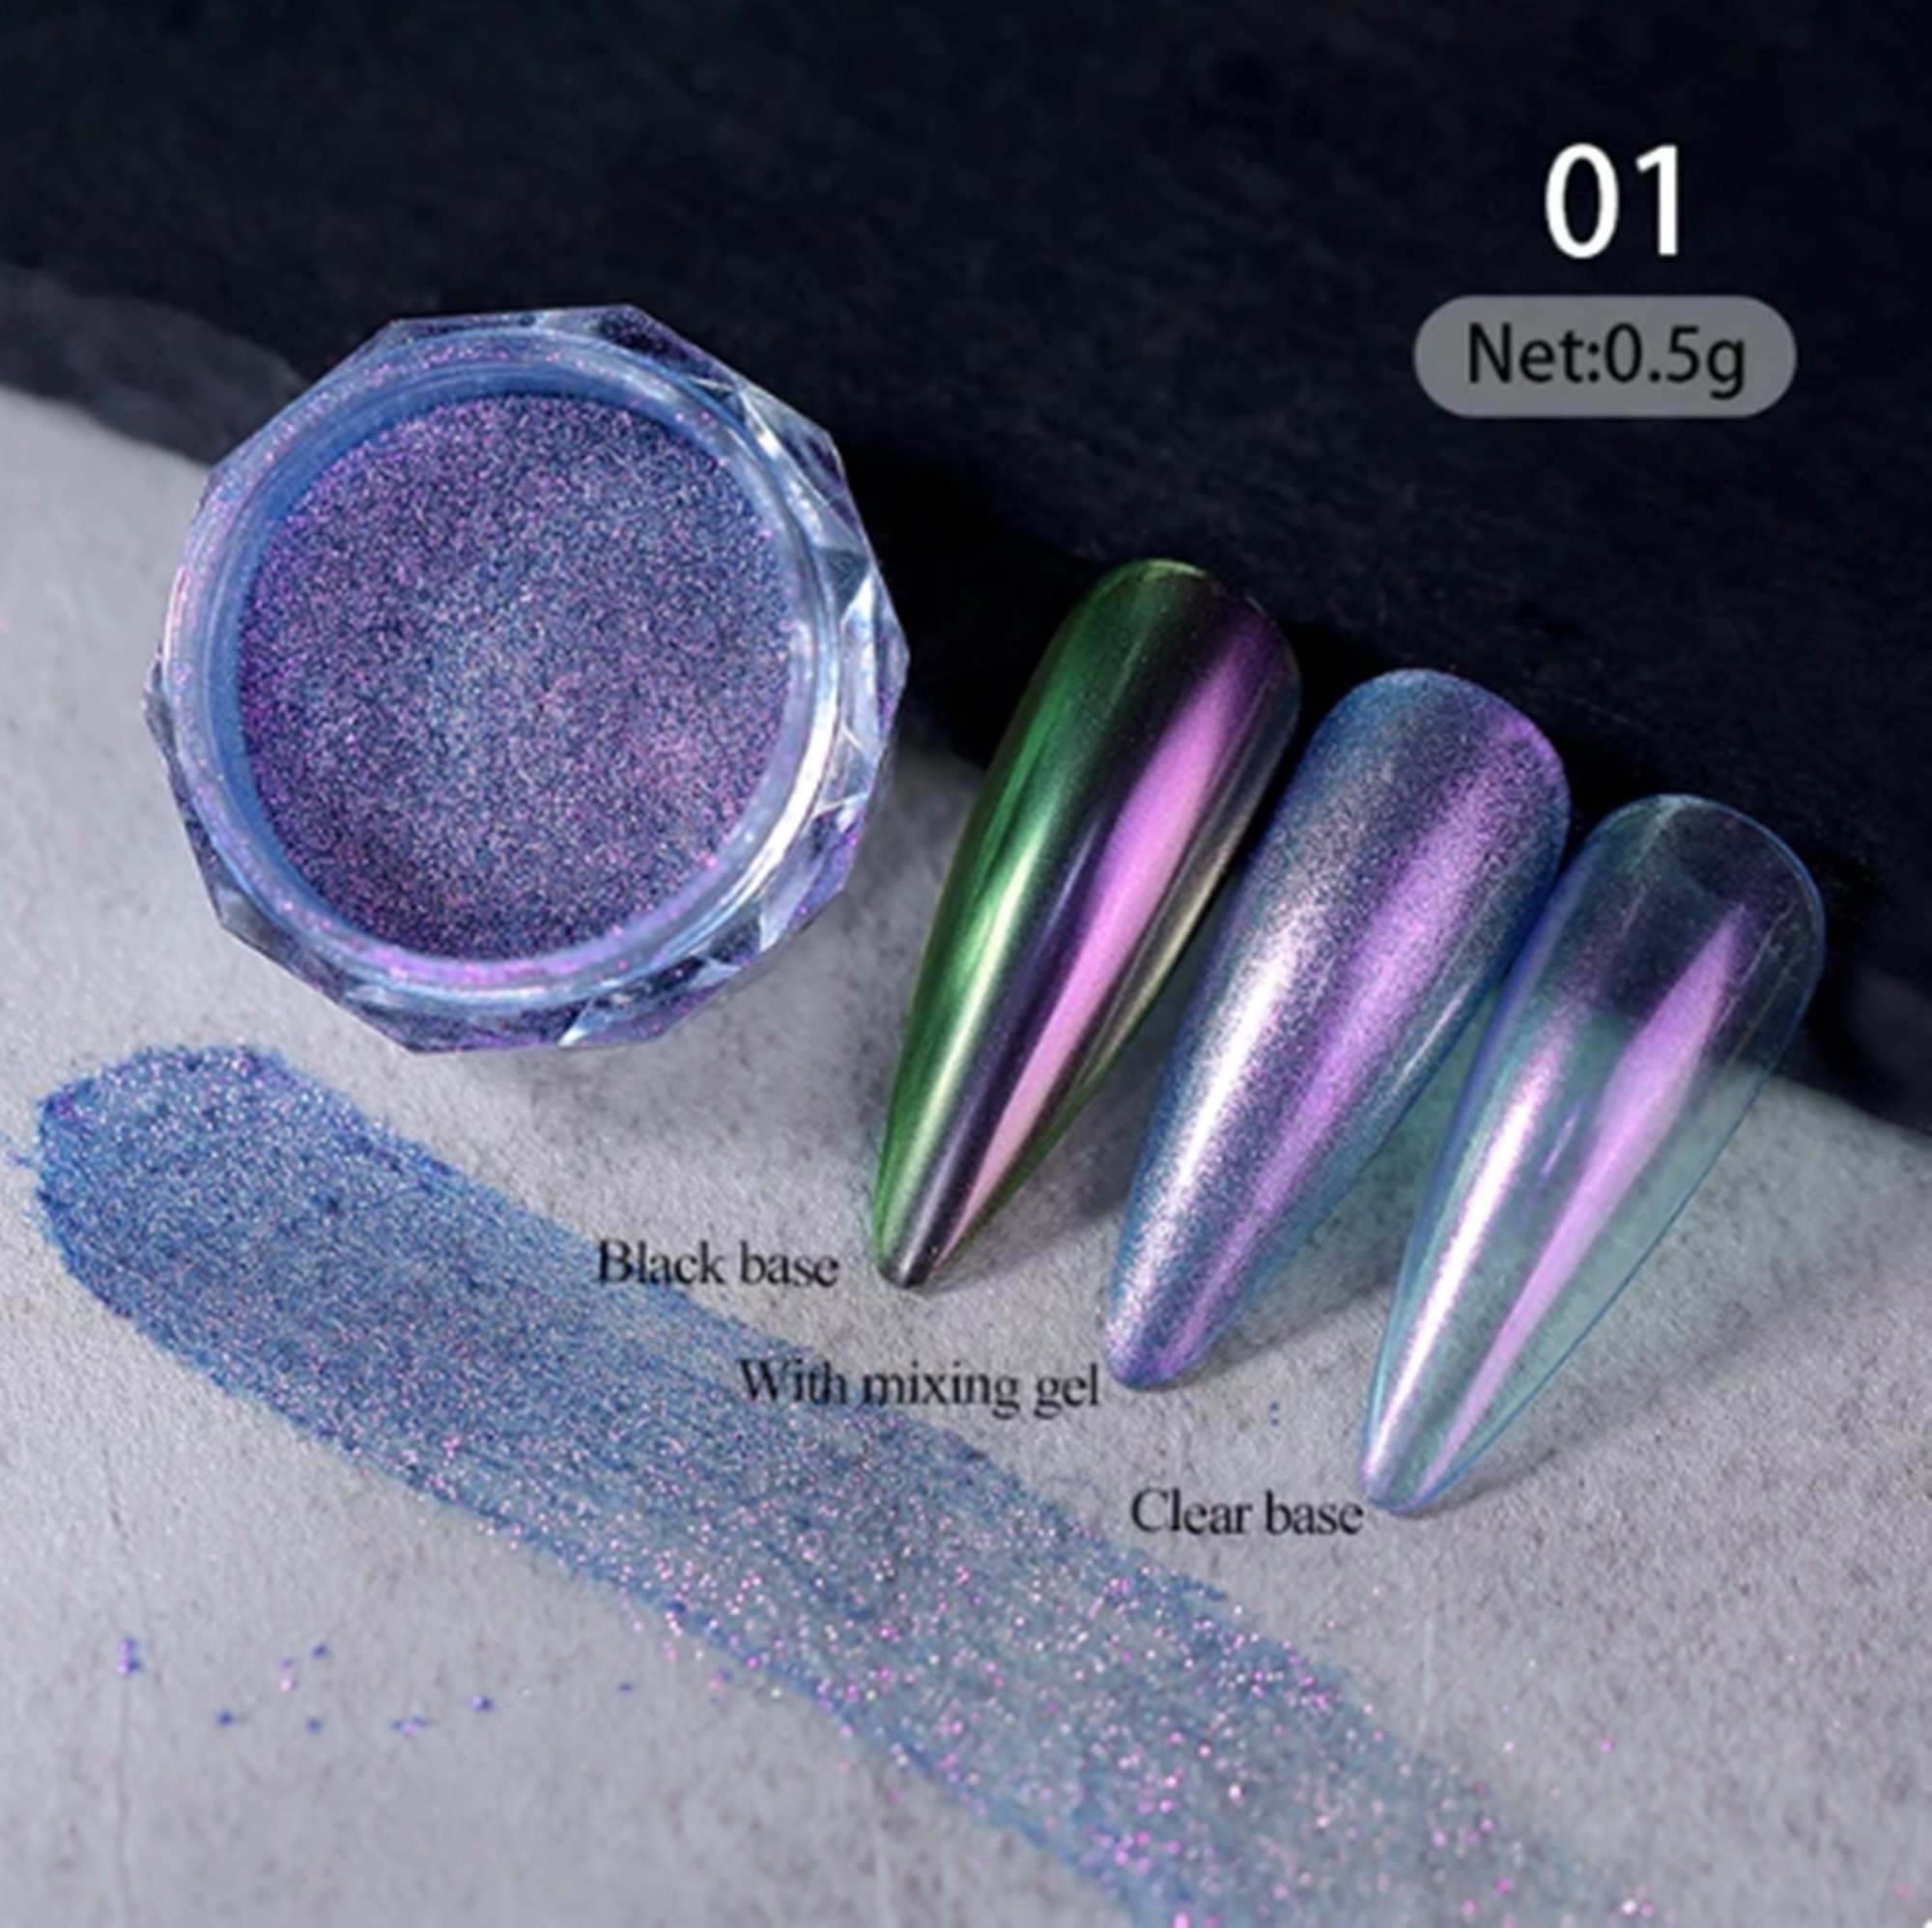 Loose Glitter Nail Two Color Solid Magic Mirror Powder Square Eyeshadow Two